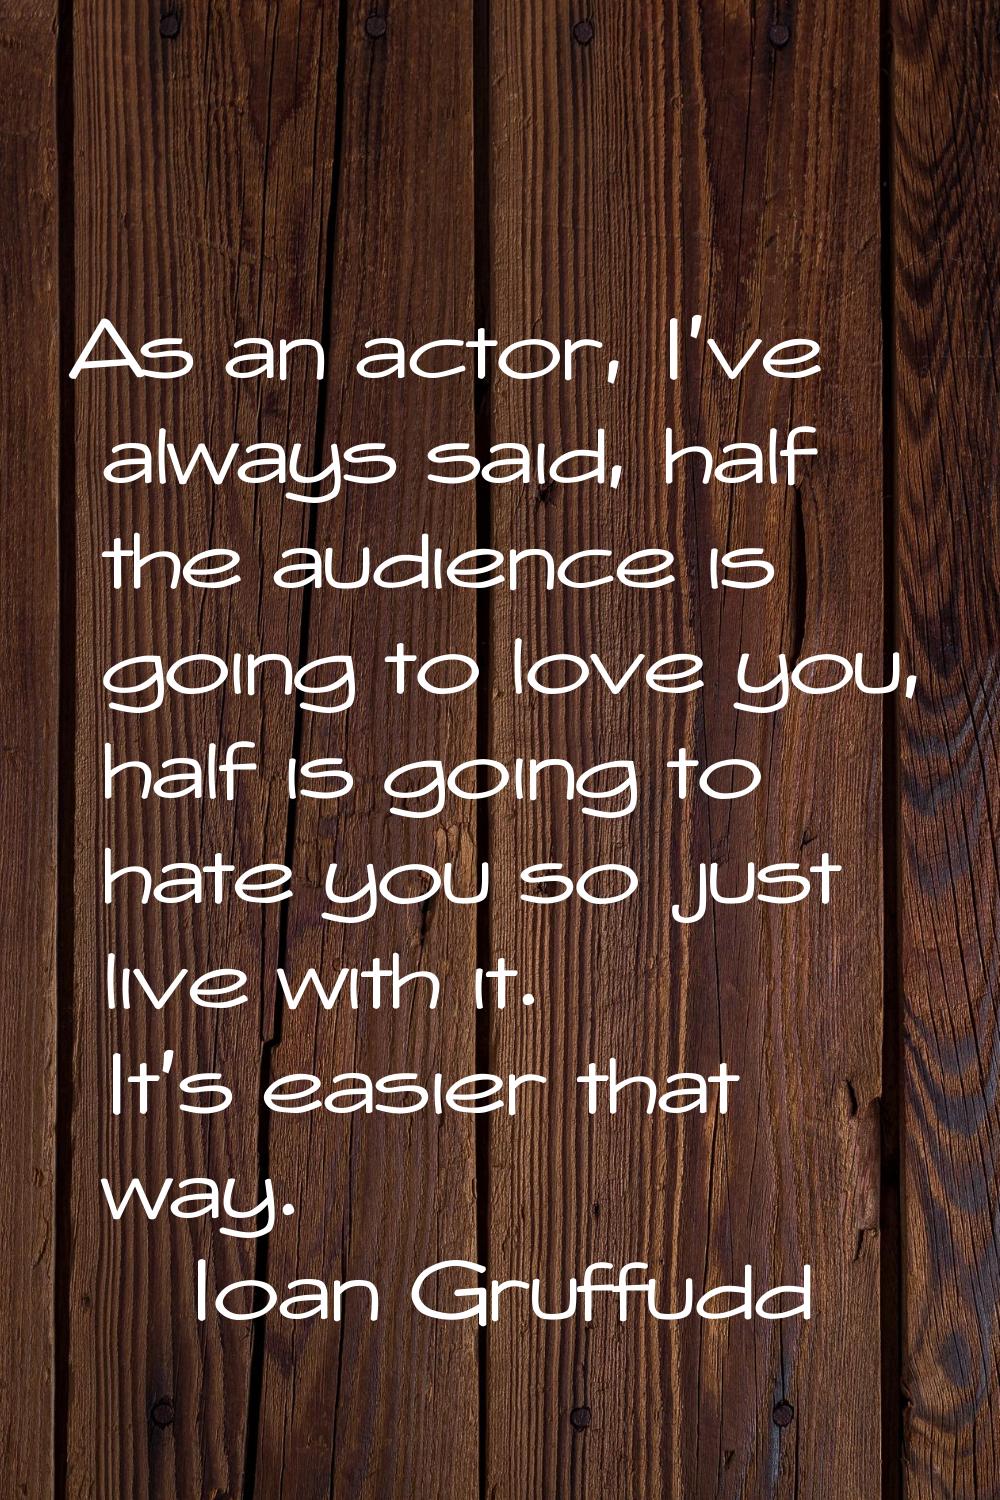 As an actor, I've always said, half the audience is going to love you, half is going to hate you so